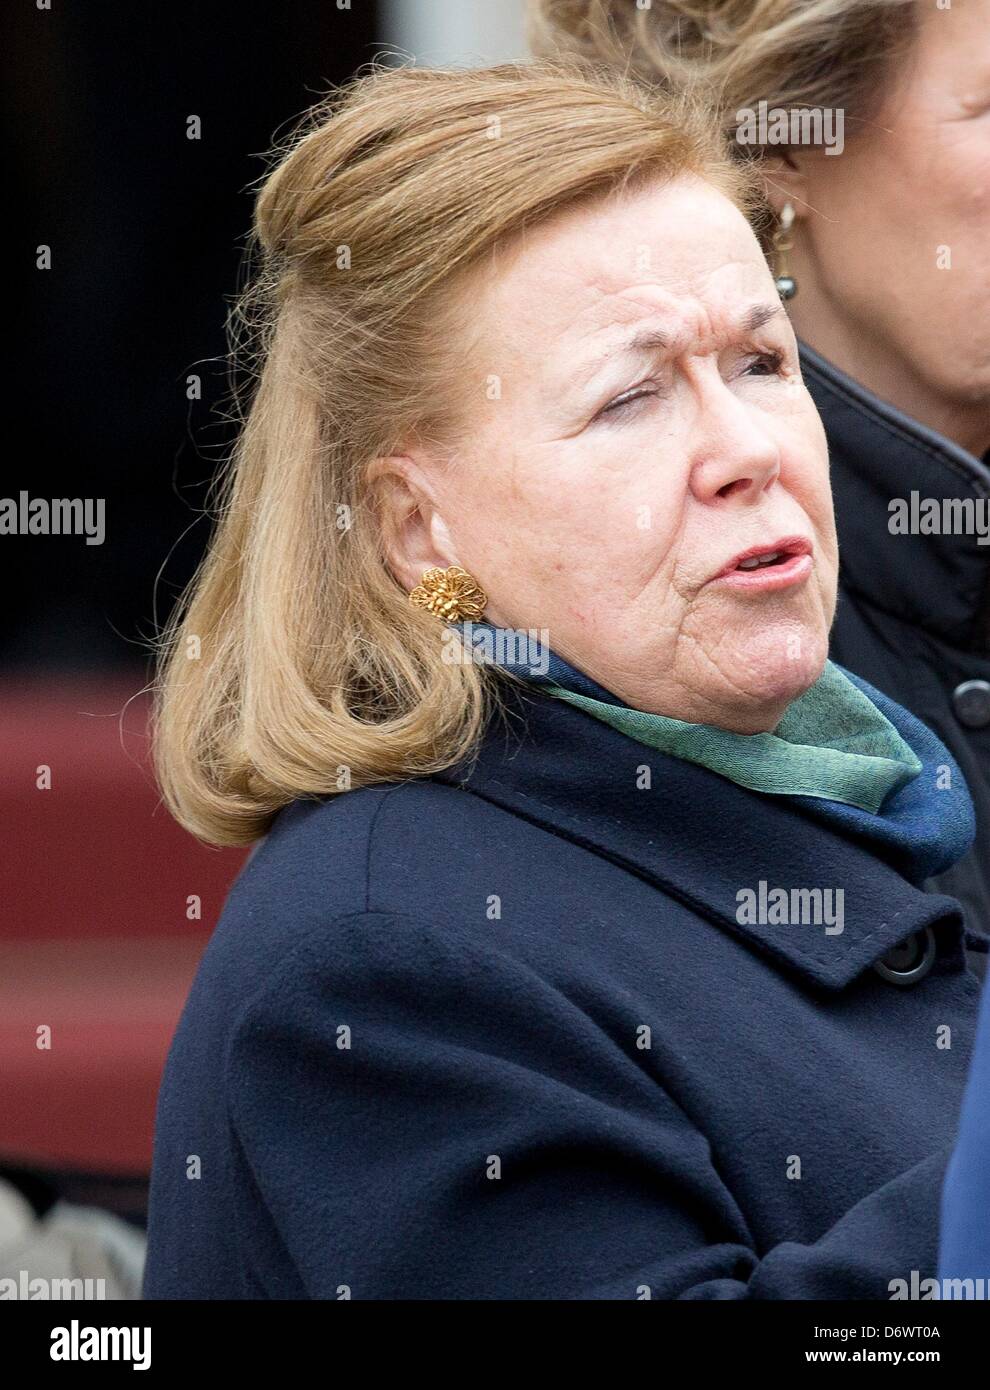 The Hague, The Netherlands. 23rd April, 2013. Princess Christina of The Netherlands attends the Koninginnedag concert (Queen's Day concert) at Royal Palace Noordeinde in The Hague, The Netherlands, 23 April 2013. Photo: Patrick van Katwijk/dpa/Alamy Live News Stock Photo